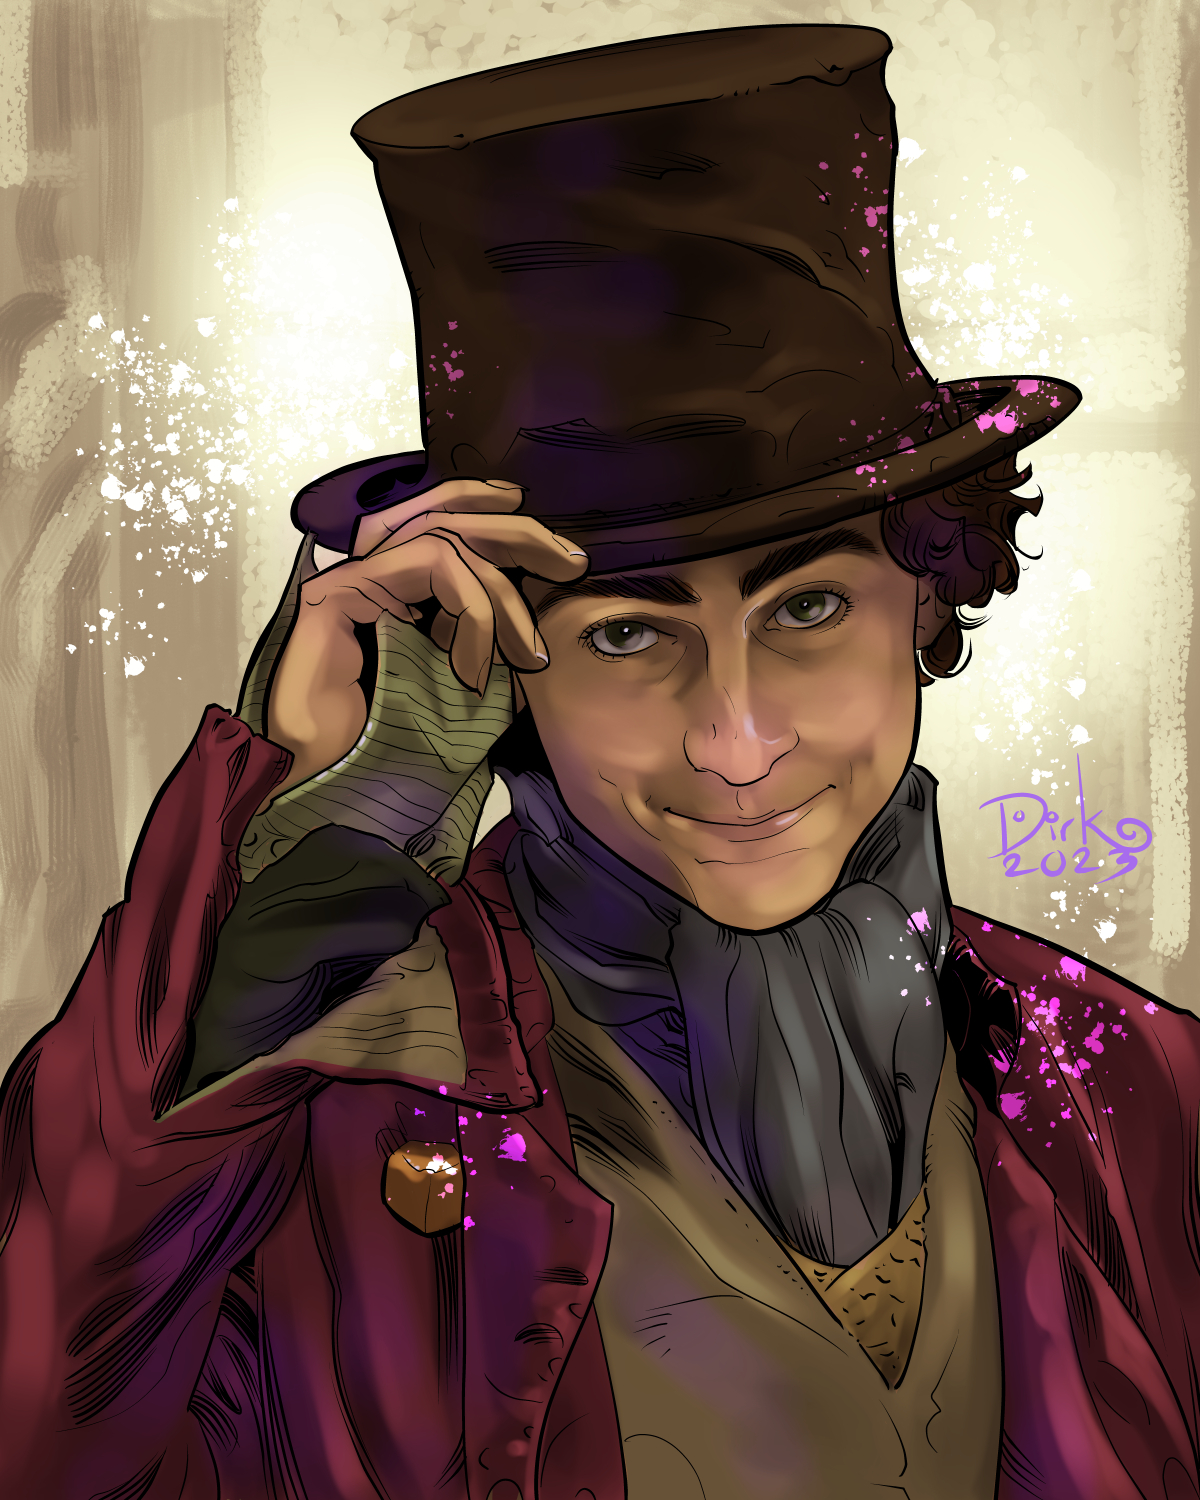 willy wonka illustration by dirk hooper